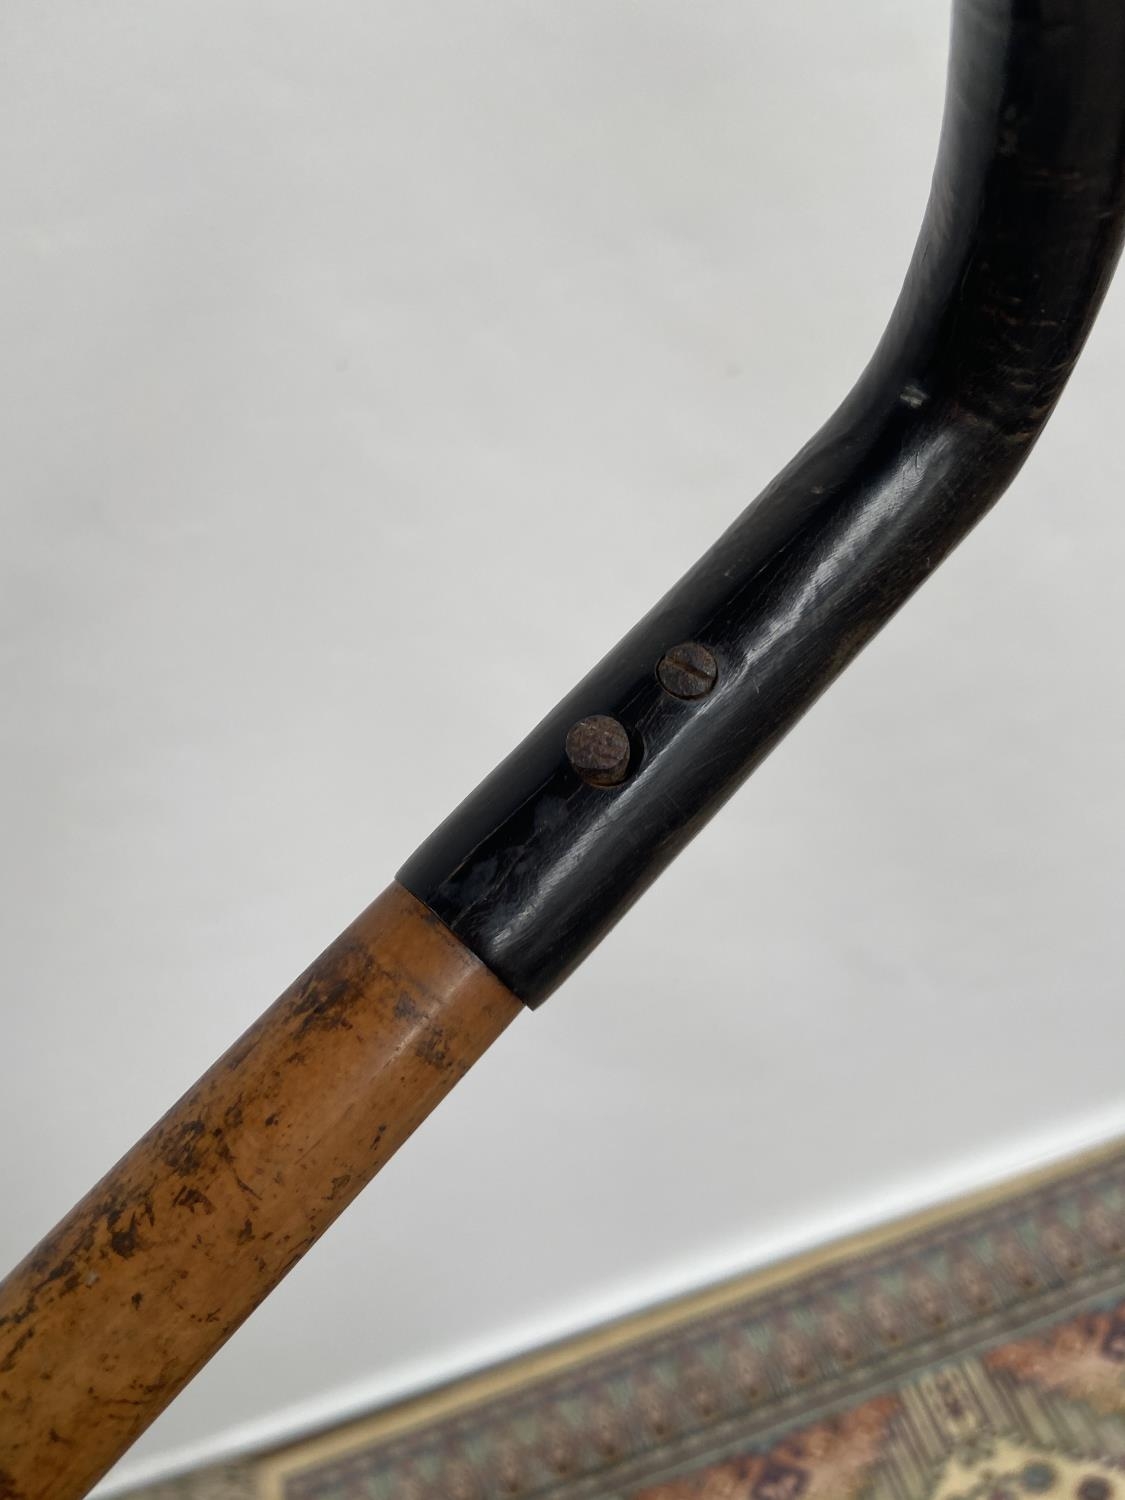 An antique walking cane pistol, designed with a bone handle and bamboo shaft [length, 90cm] - Image 4 of 5